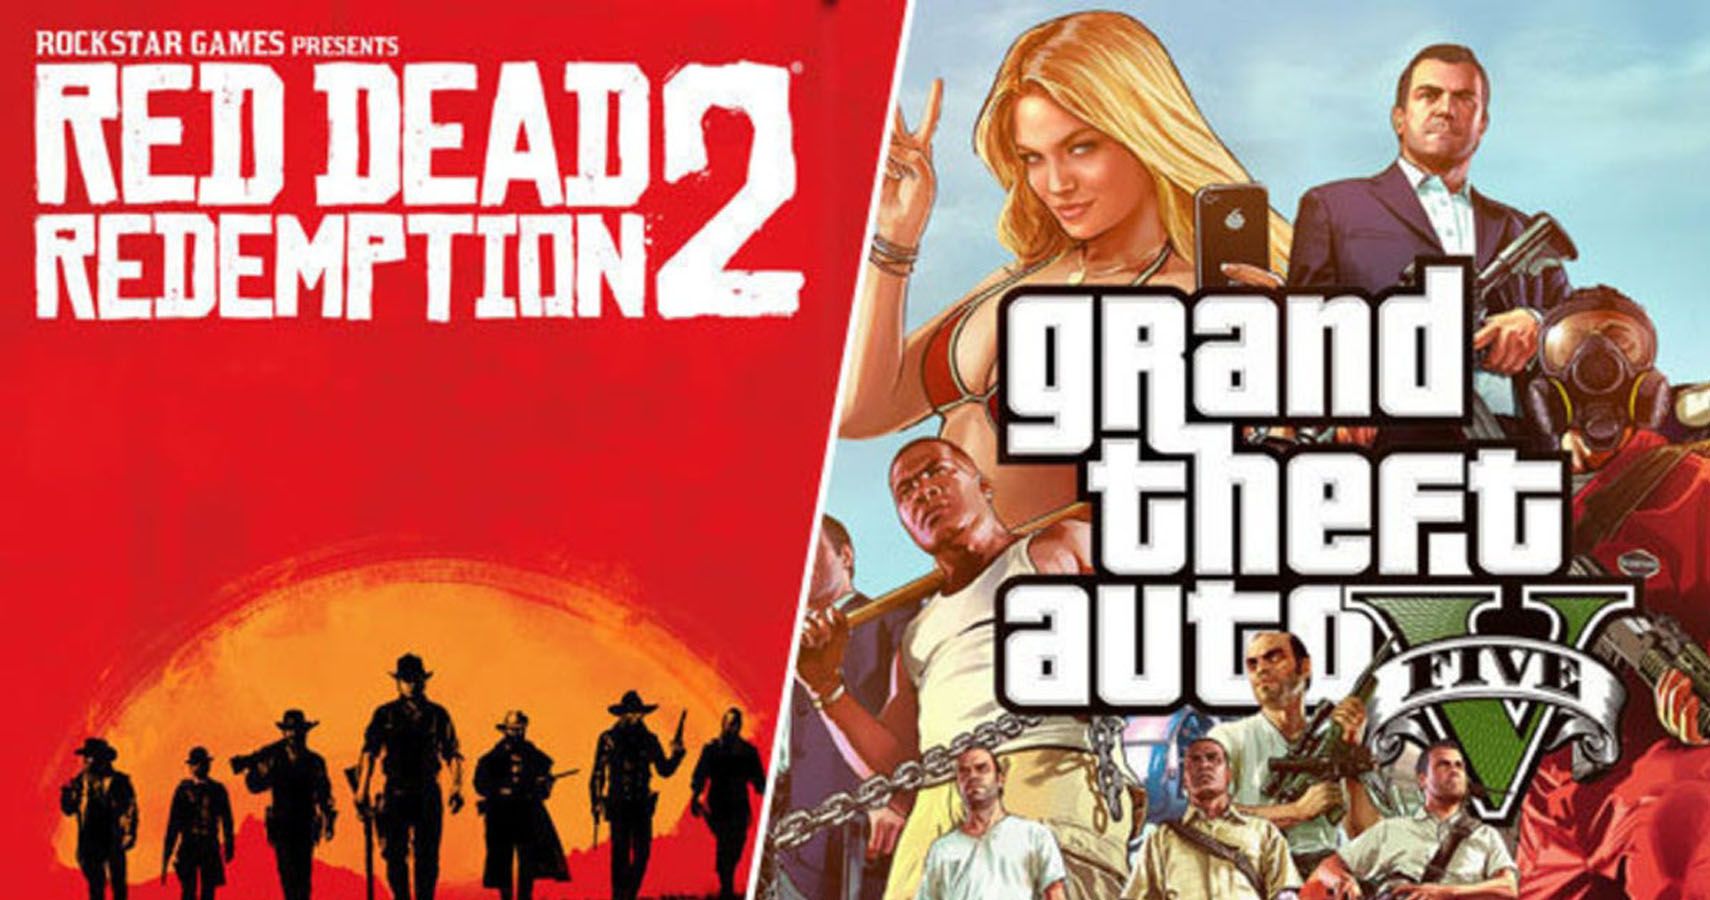 Grand Theft Auto V Vs Red Dead Redemption 2 Which Game Is Actually Better?